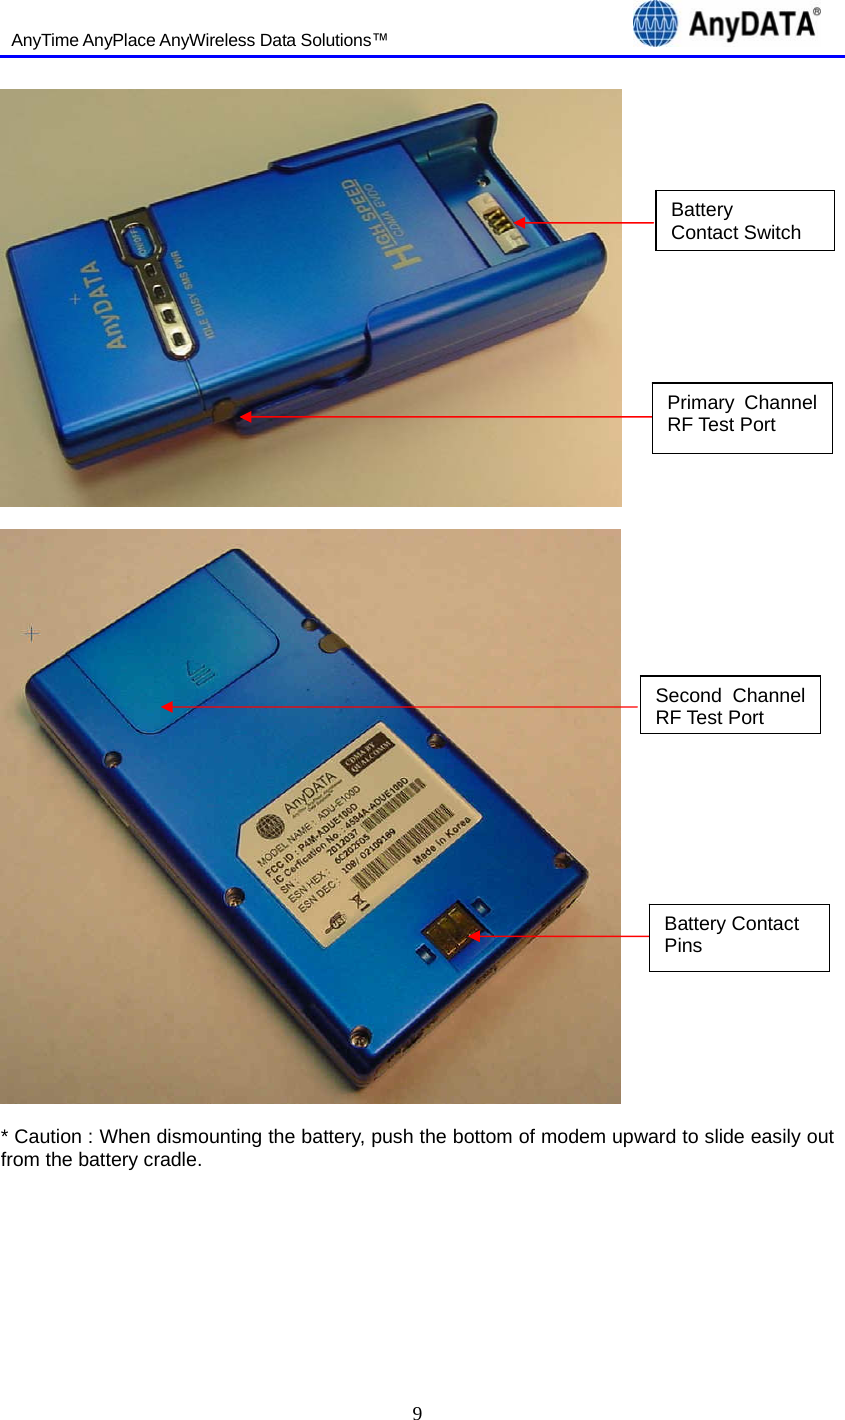   AnyTime AnyPlace AnyWireless Data Solutions™                                 9       * Caution : When dismounting the battery, push the bottom of modem upward to slide easily out from the battery cradle.      Battery  Contact Switch Primary Channel RF Test Port Battery Contact   Pins Second Channel  RF Test Port 